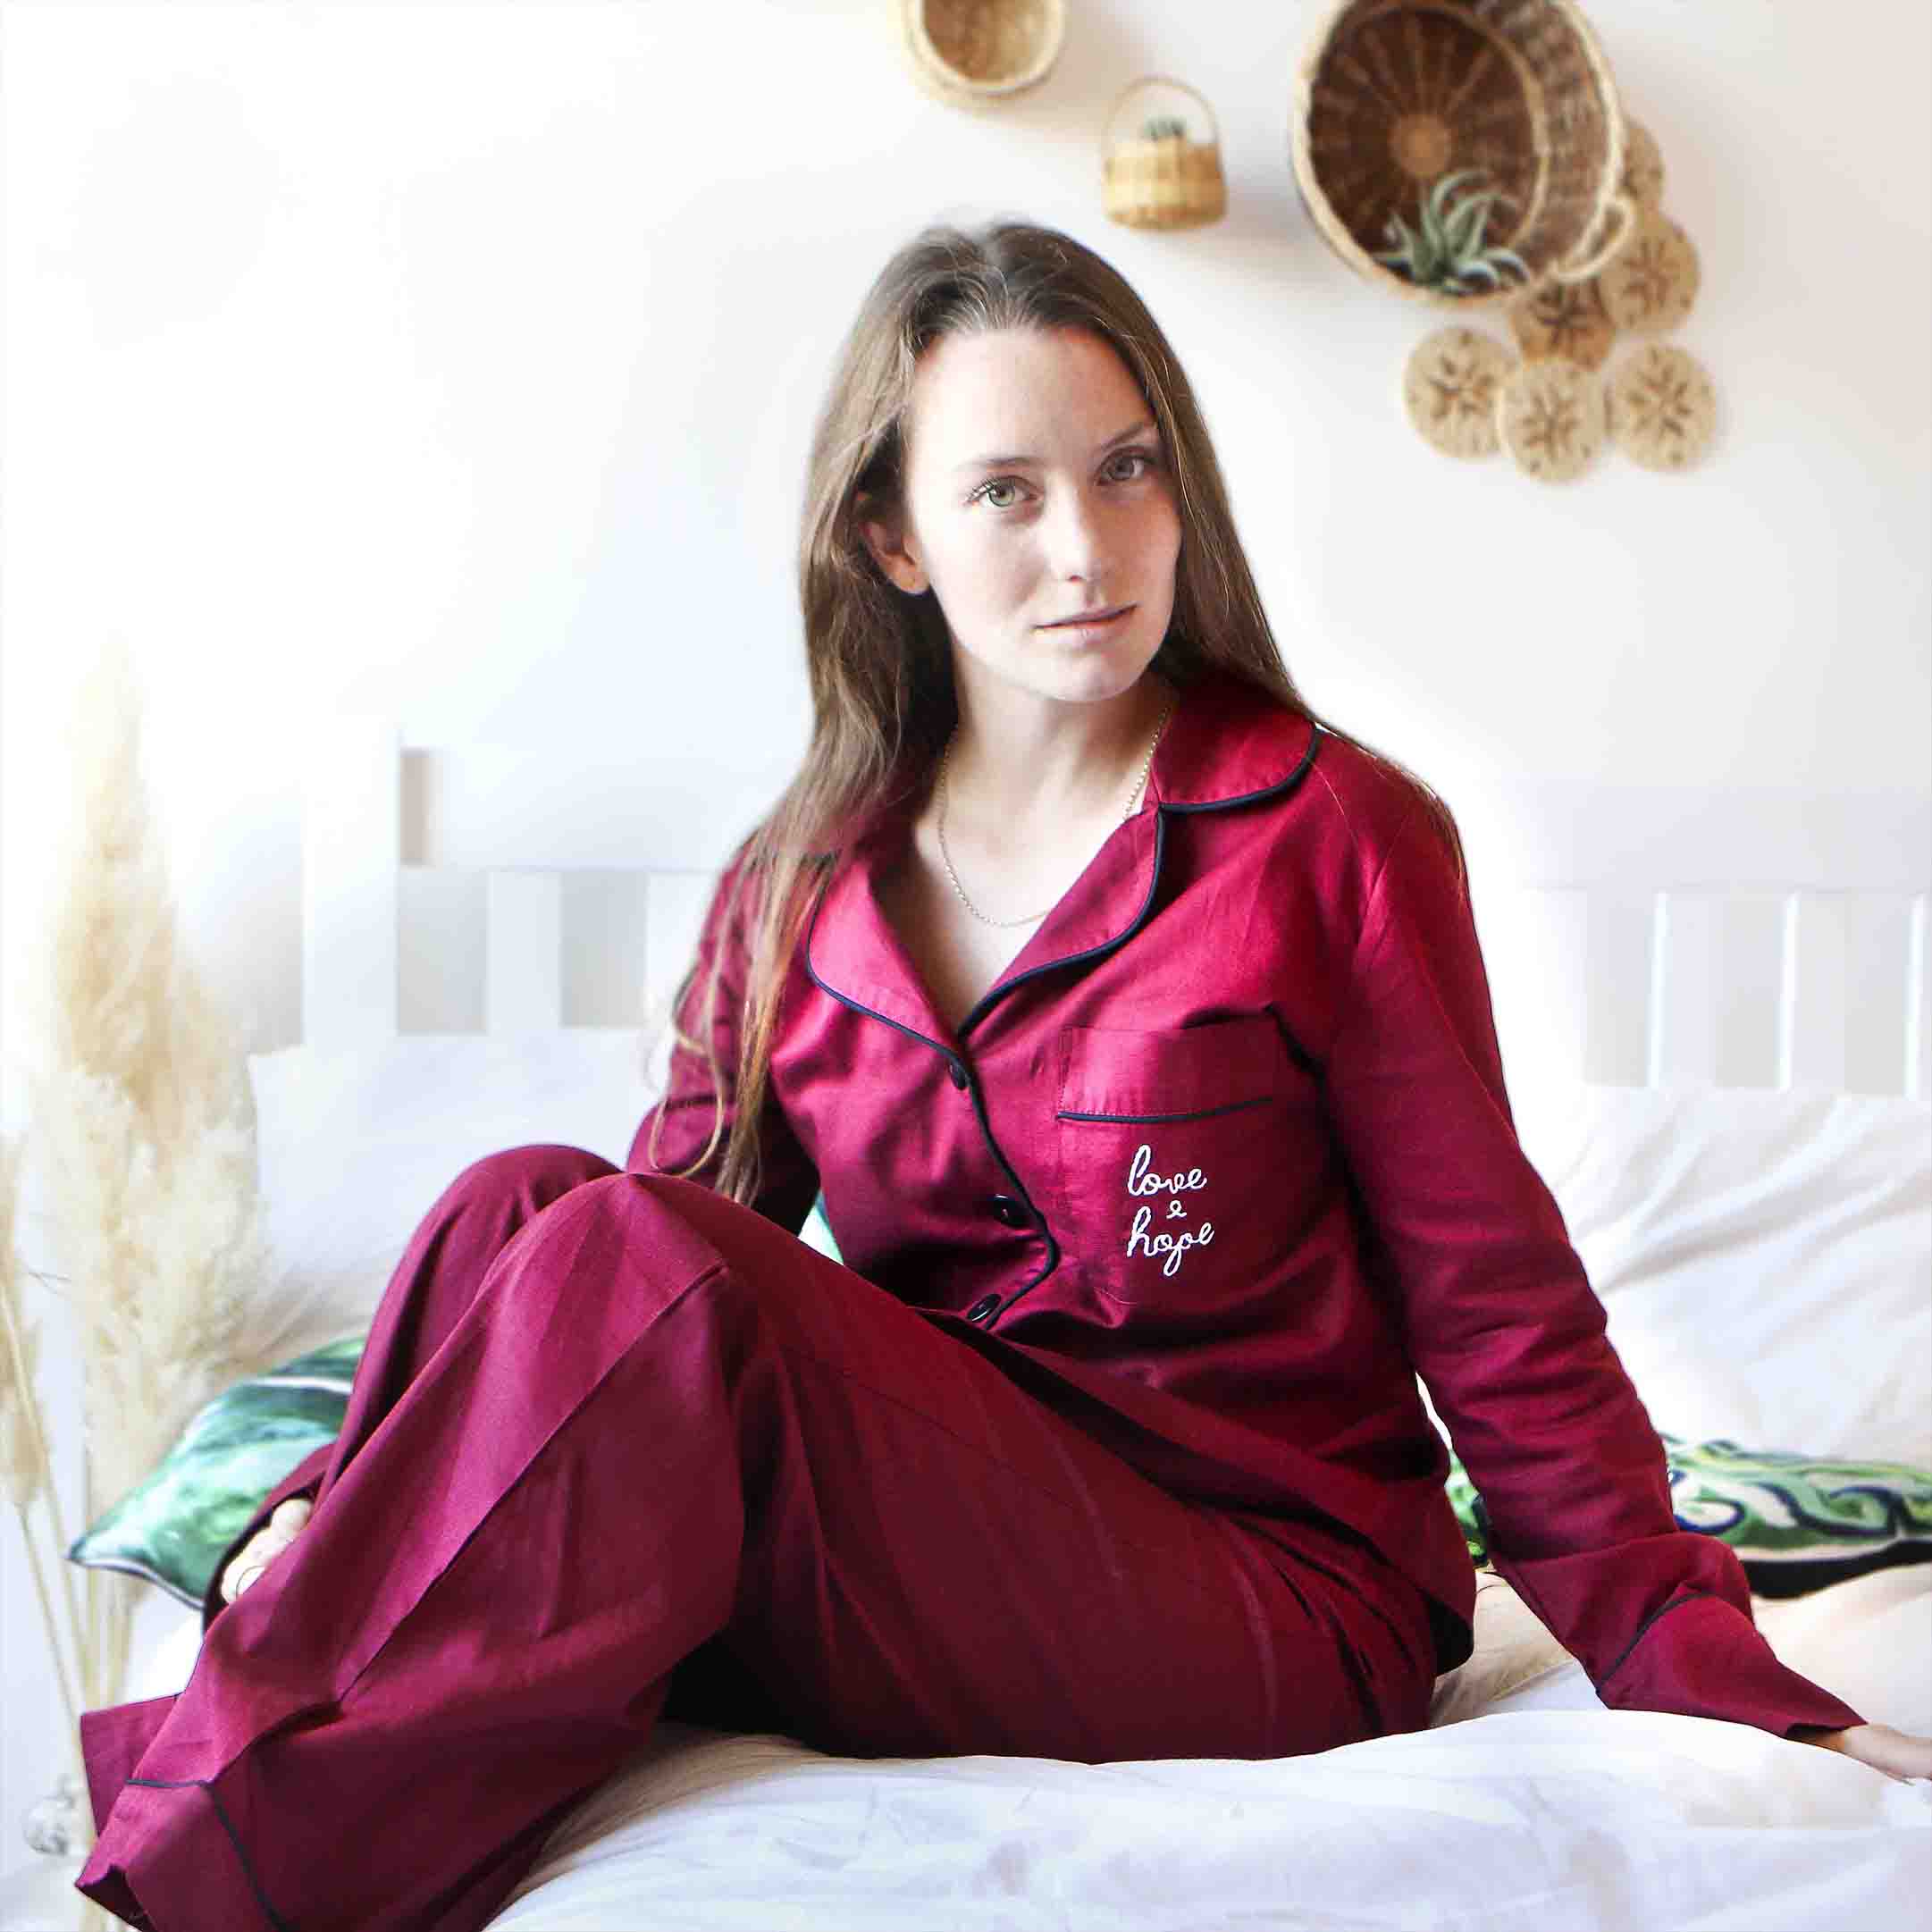 Organic Cotton Pyjamas by StephieAnn. Hand embroidered in Britain.